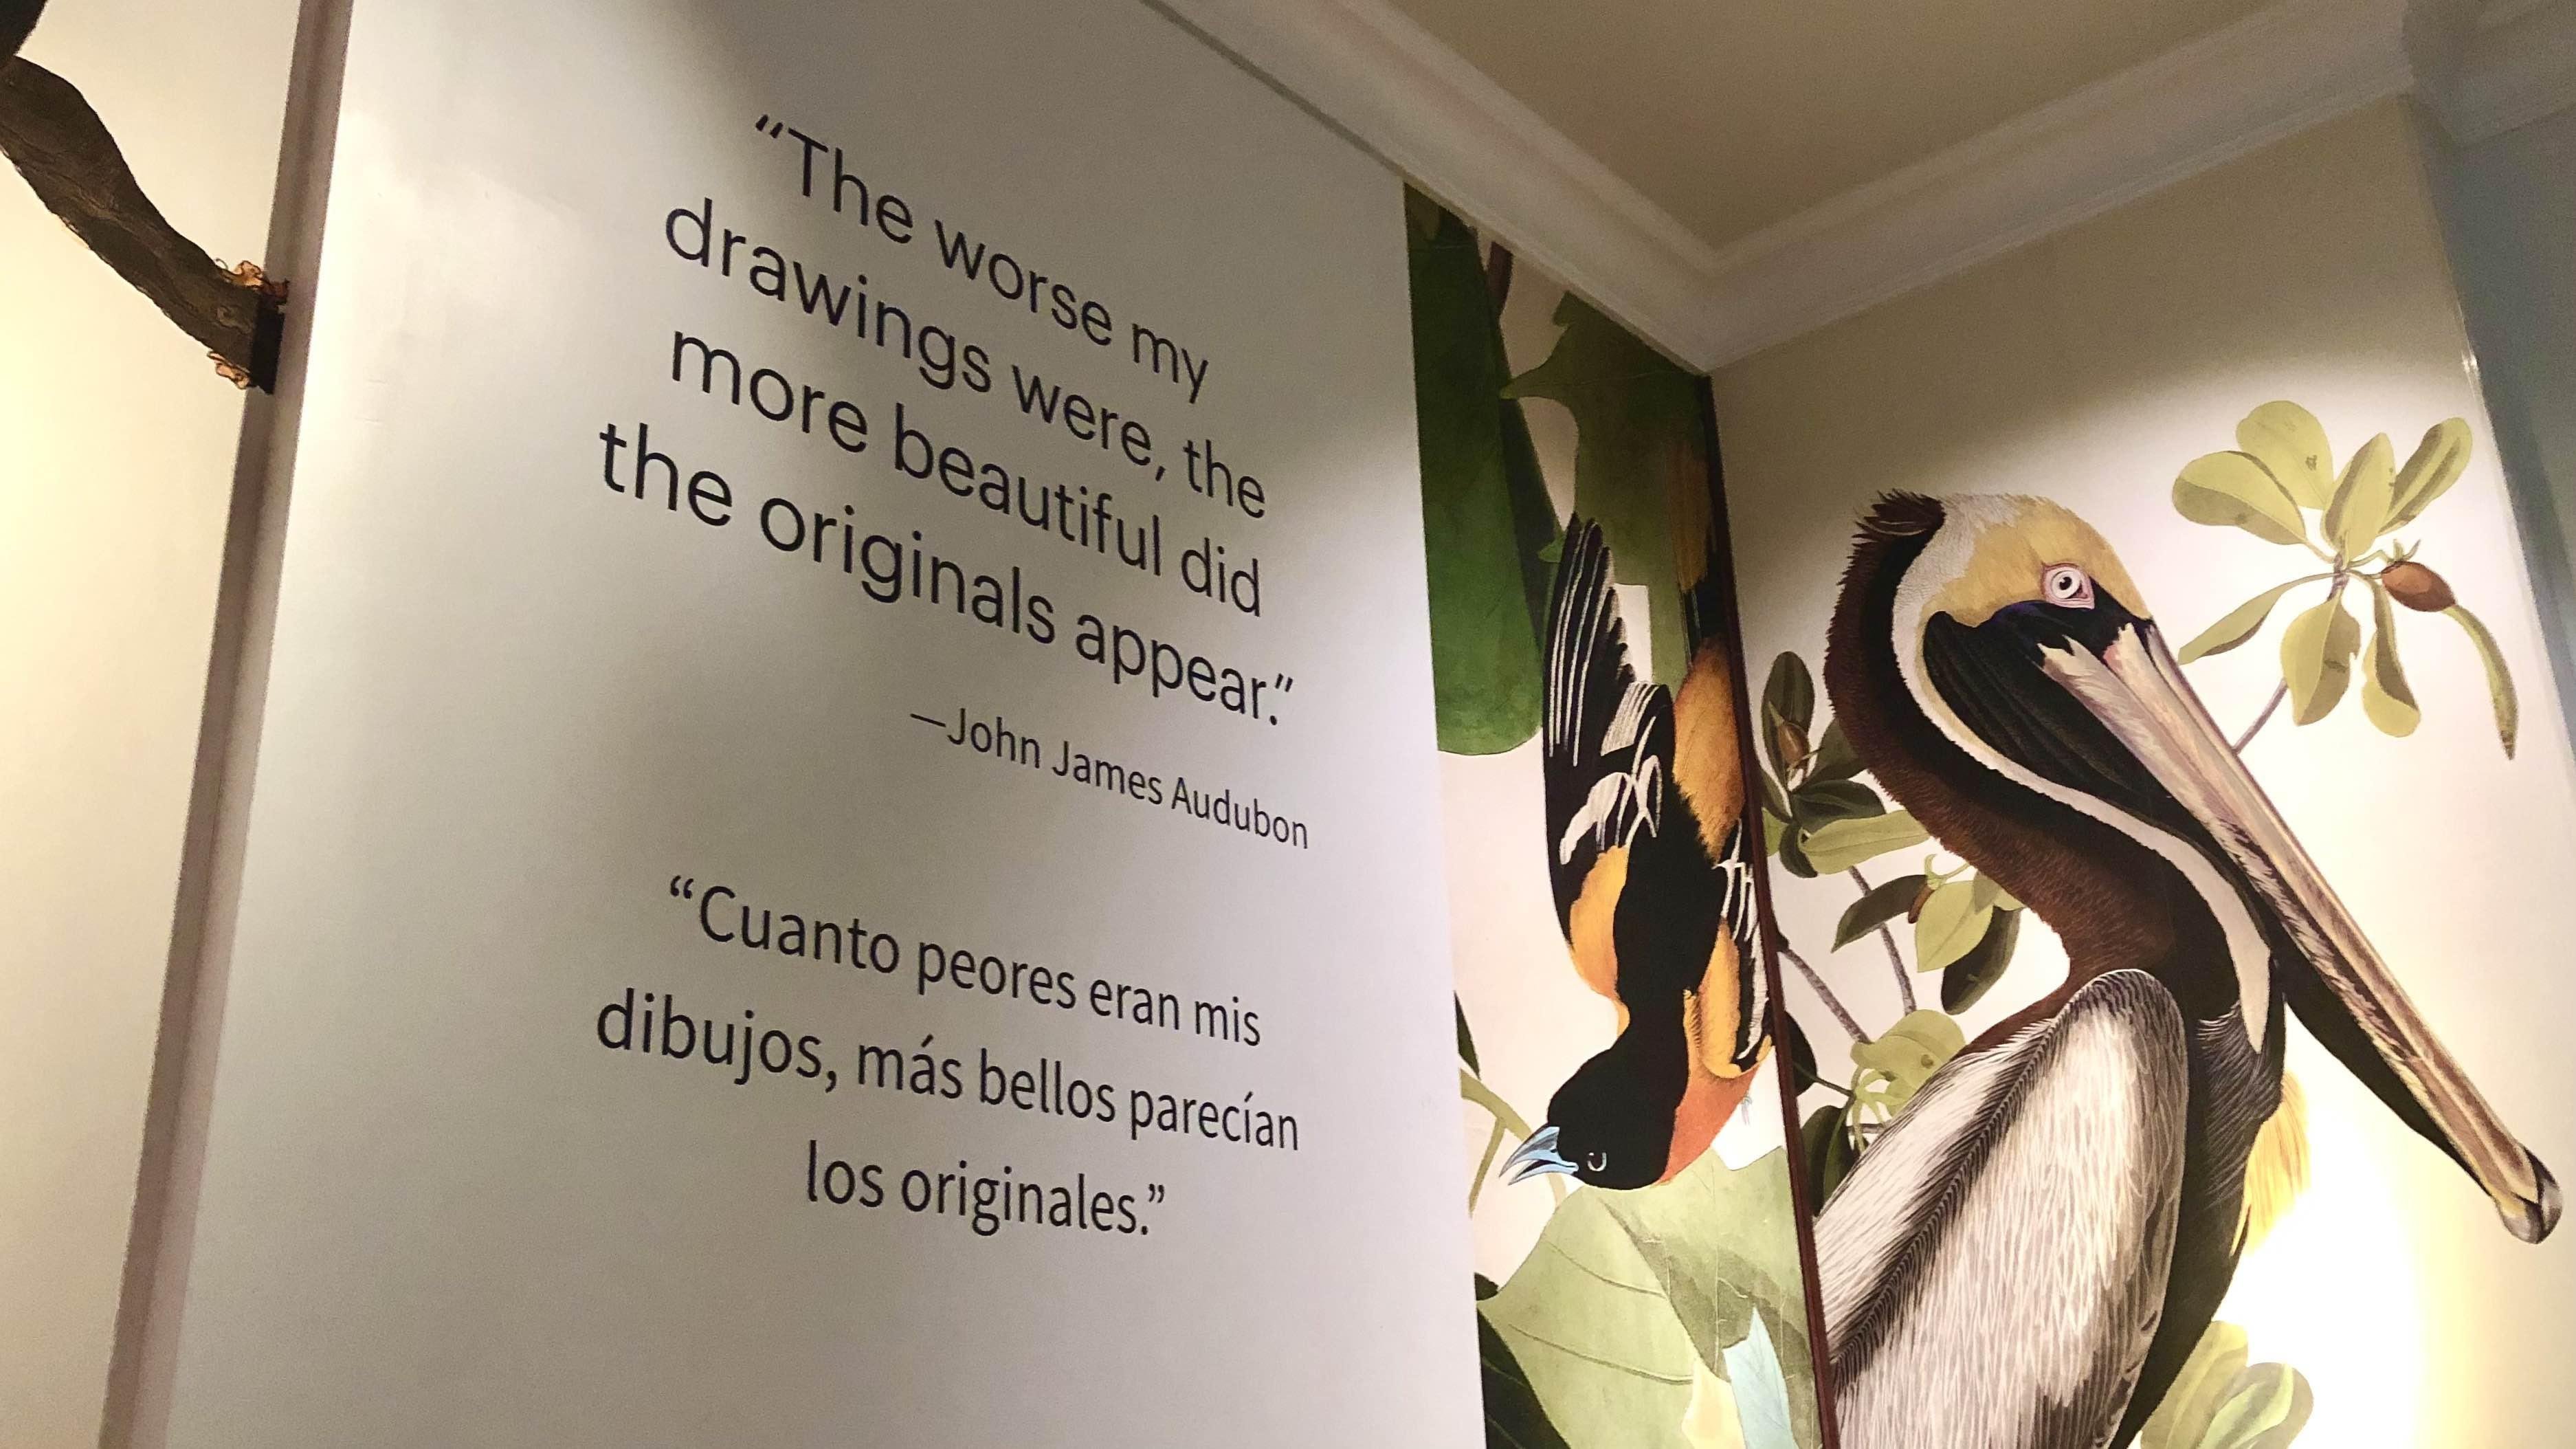 The exhibit features floor-to-ceiling images drawn from “Birds of America.” (Patty Wetli / WTTW News)